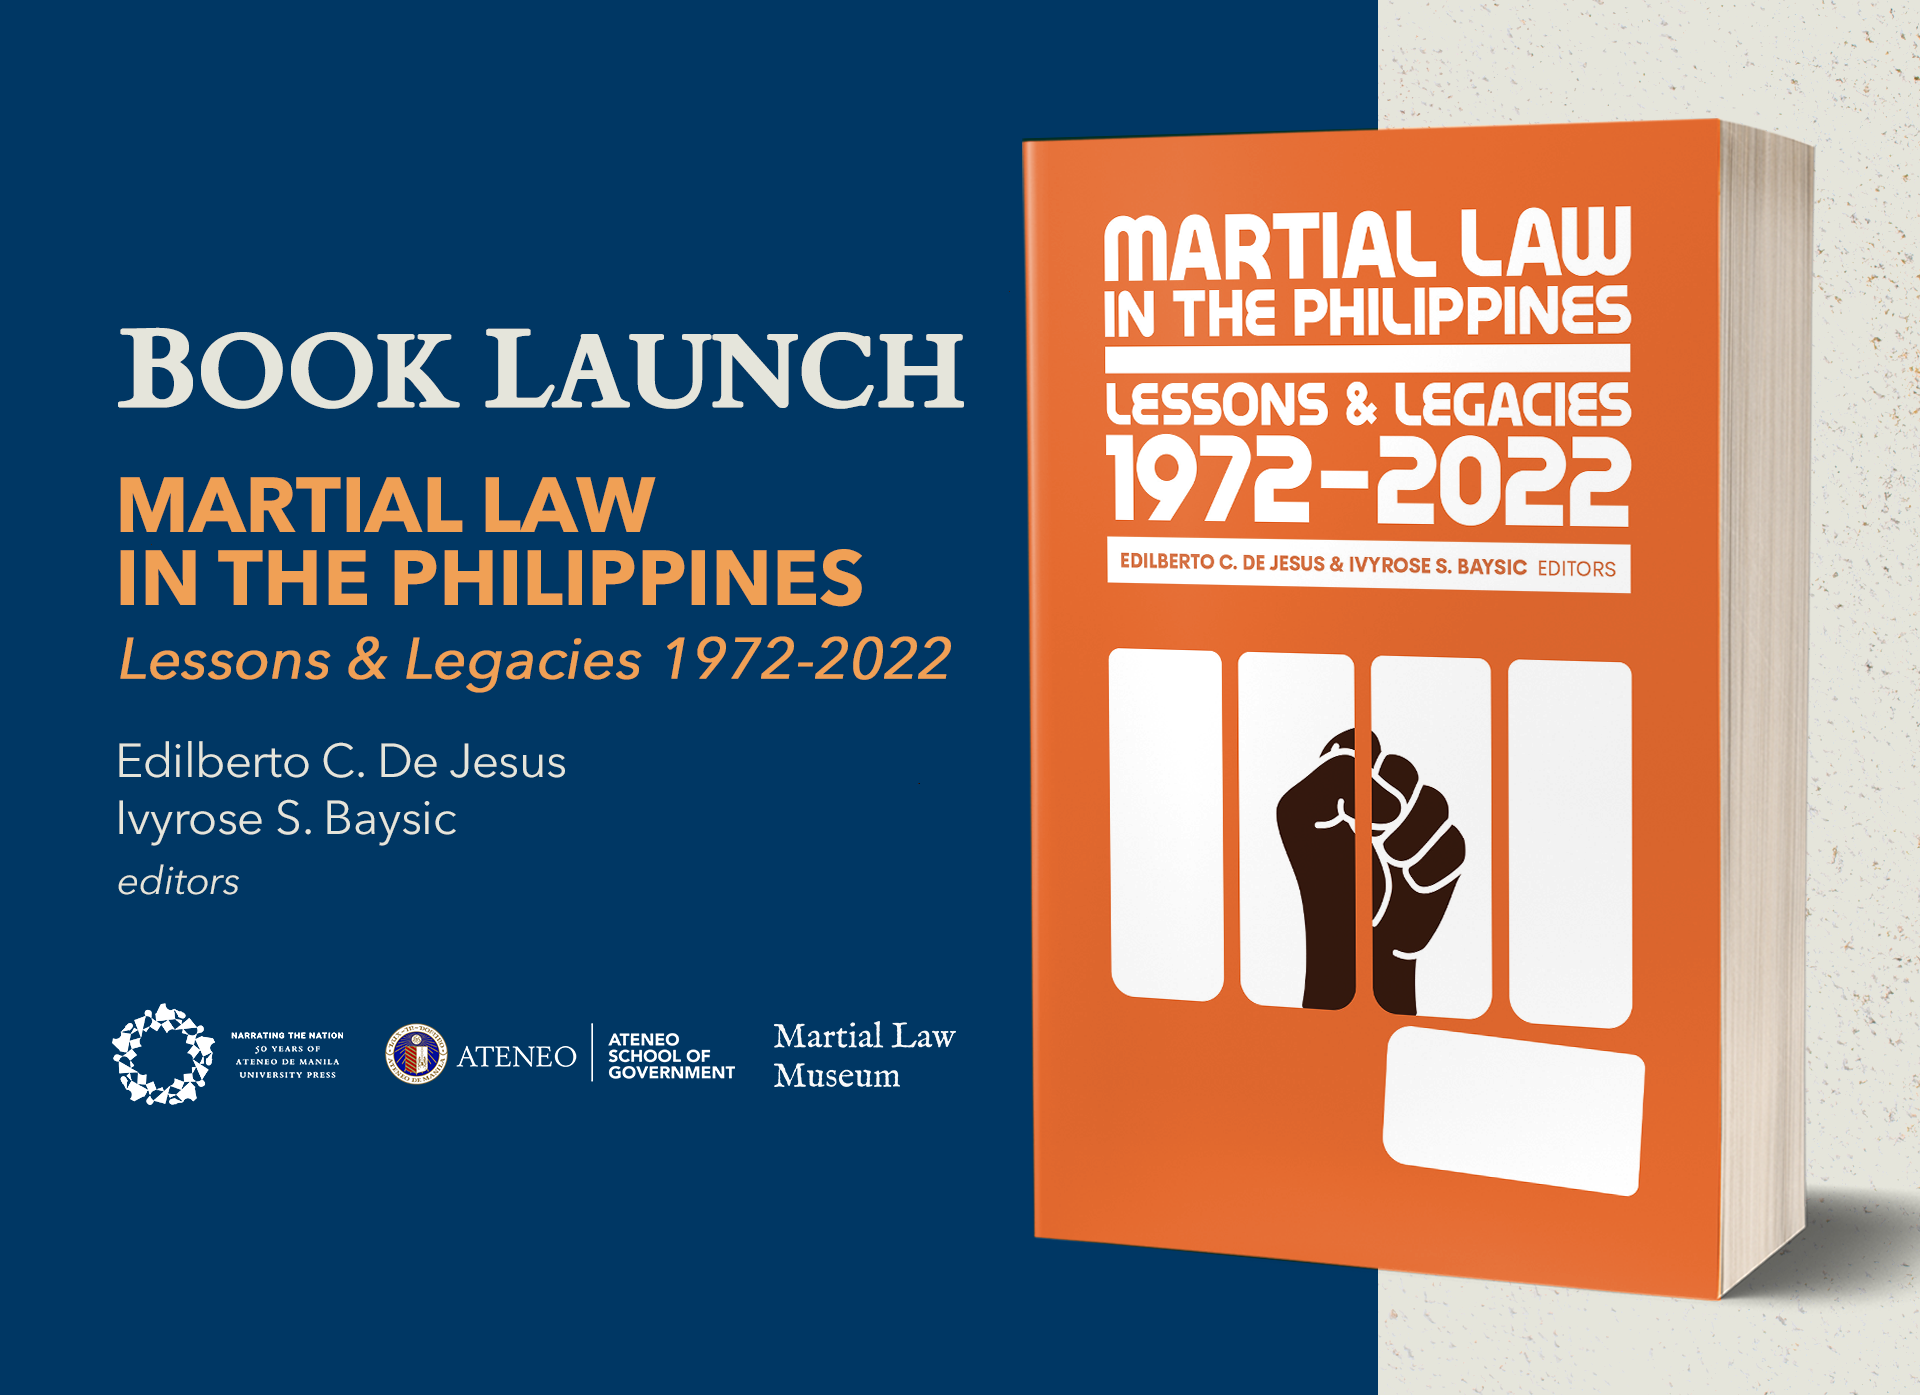 Book launch of Martial Law in the Philippines: Lessons & Legacies, 1972-2022